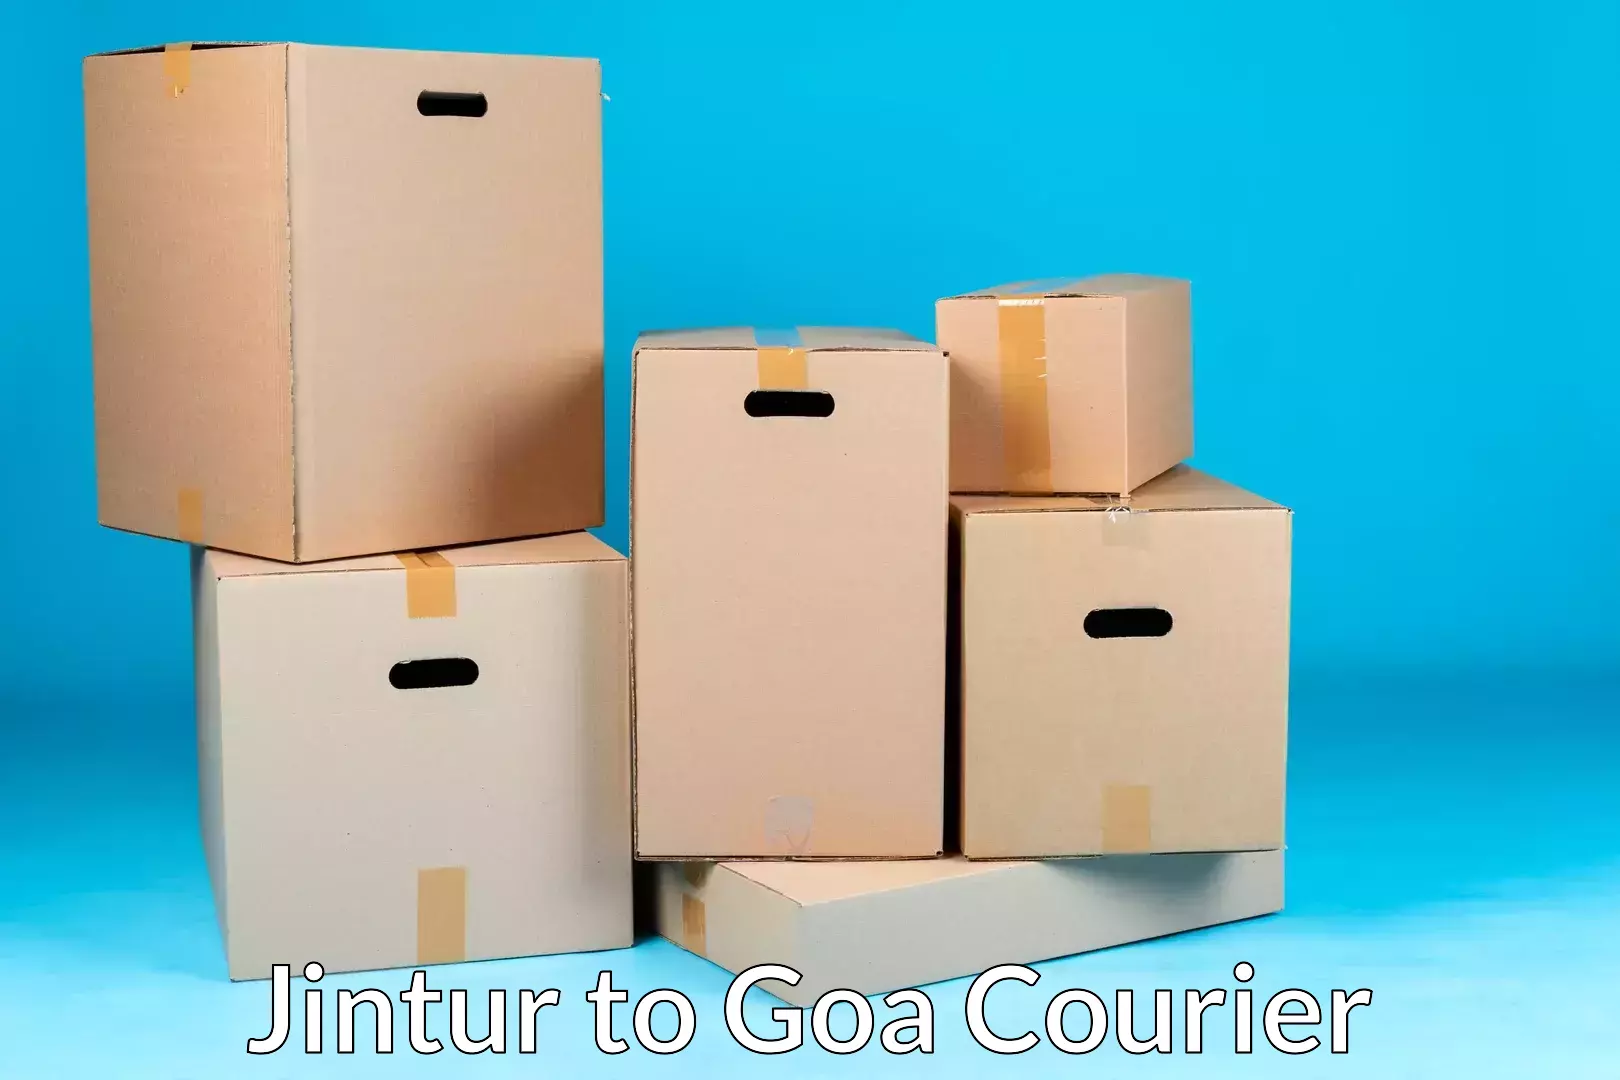 Hassle-free relocation Jintur to Margao